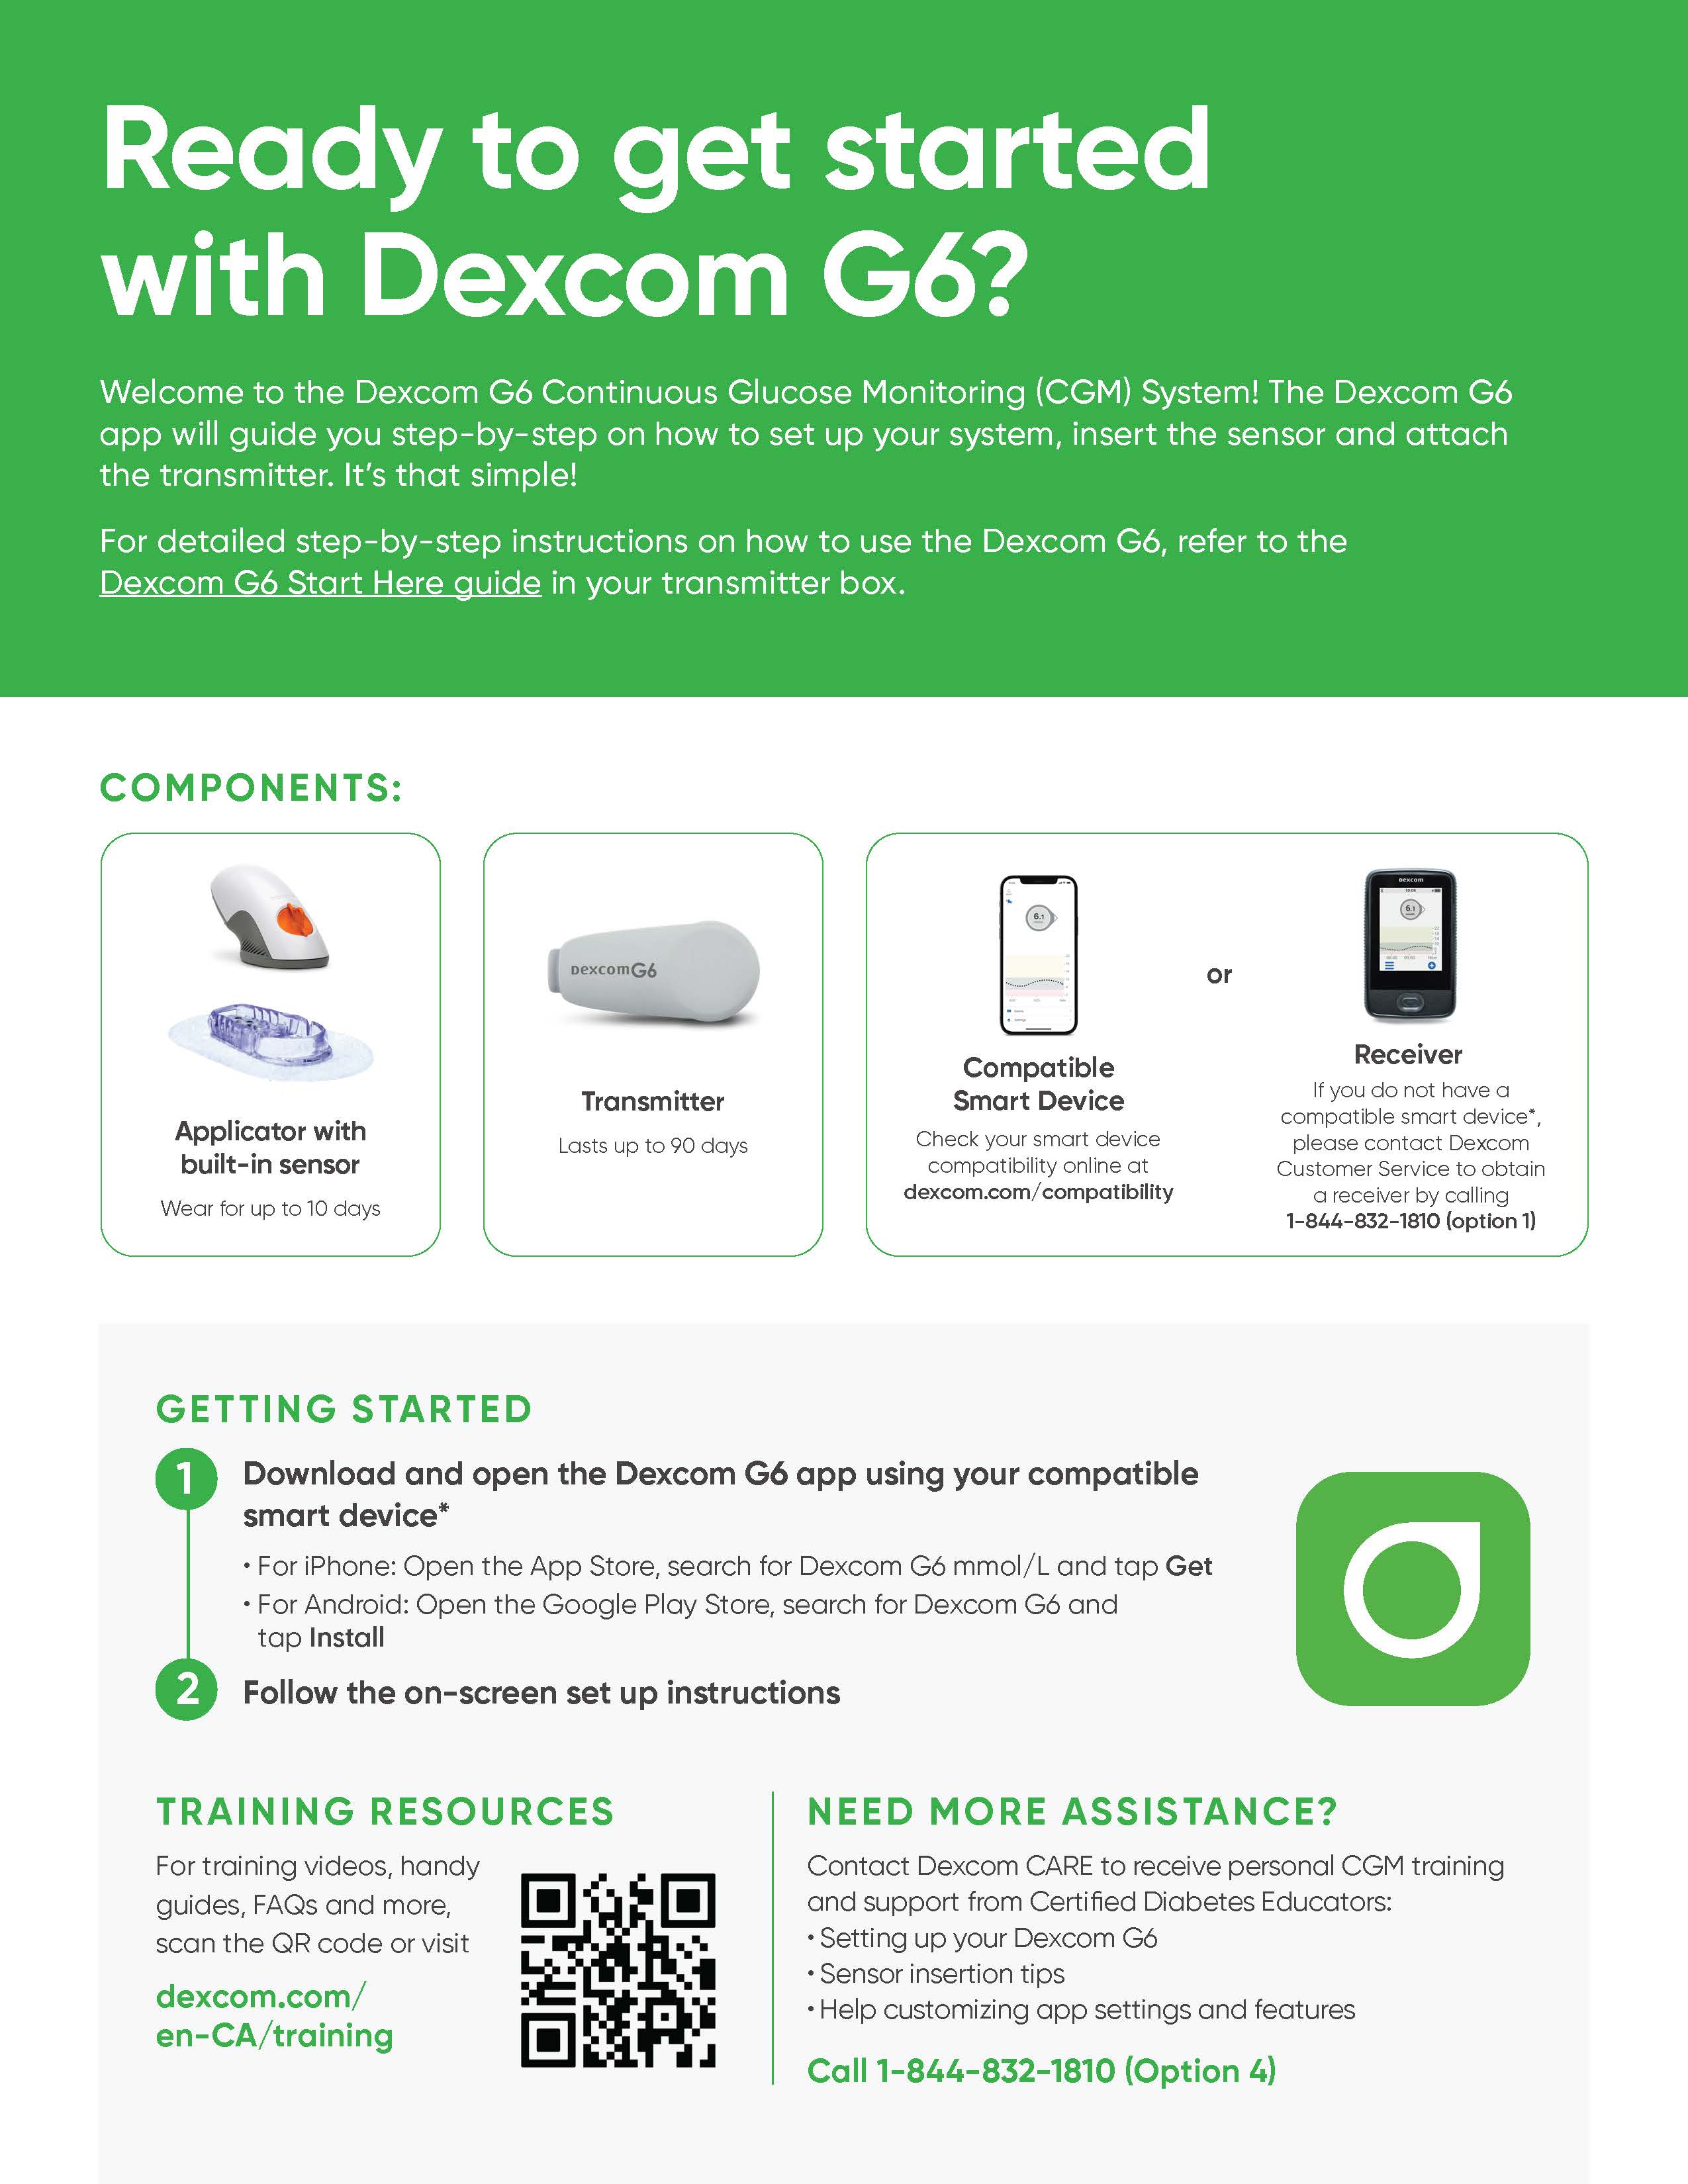 A helpful tool to give to patients first starting on Dexcom G6